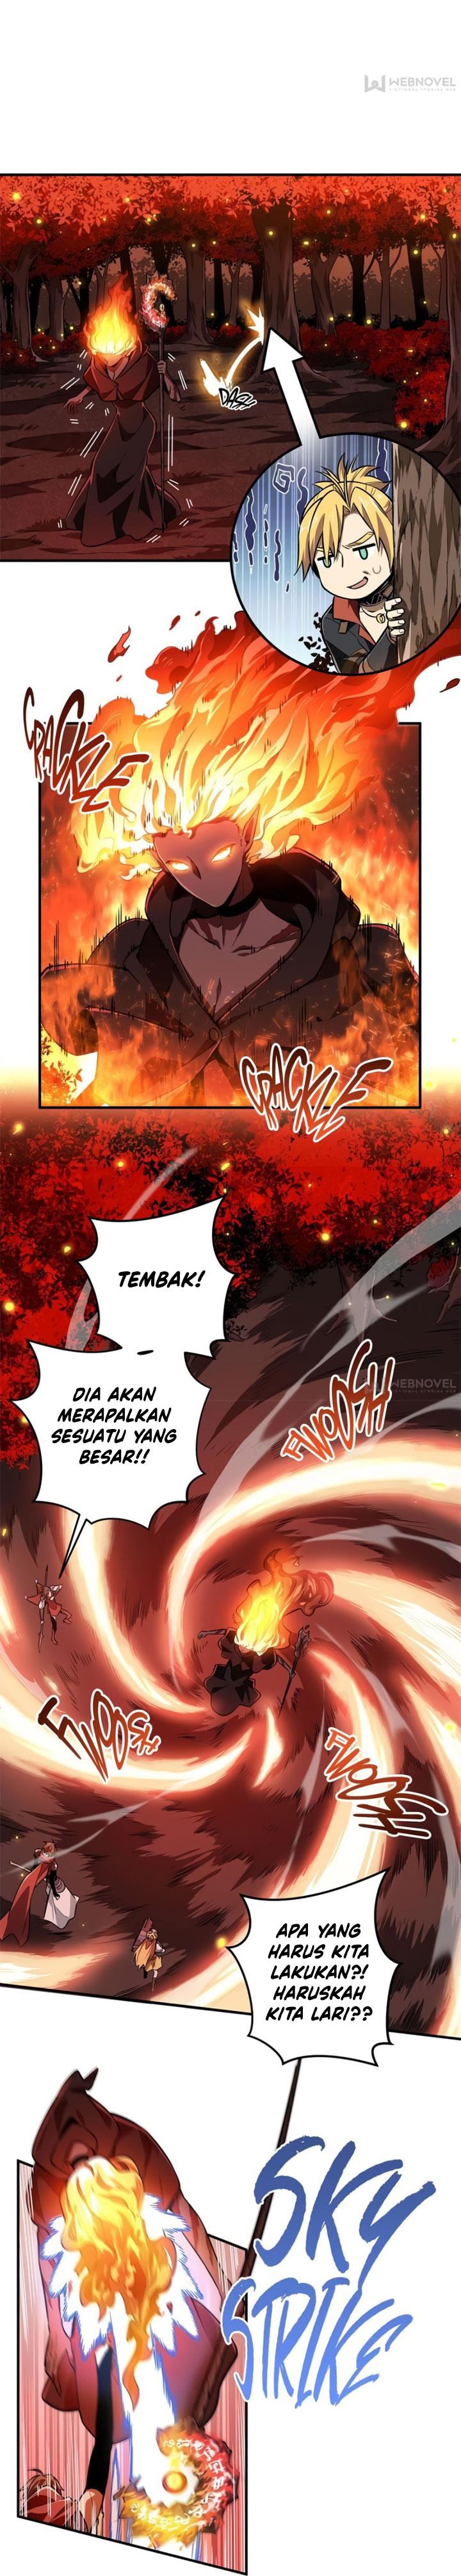 The King’s Avatar Chapter 79